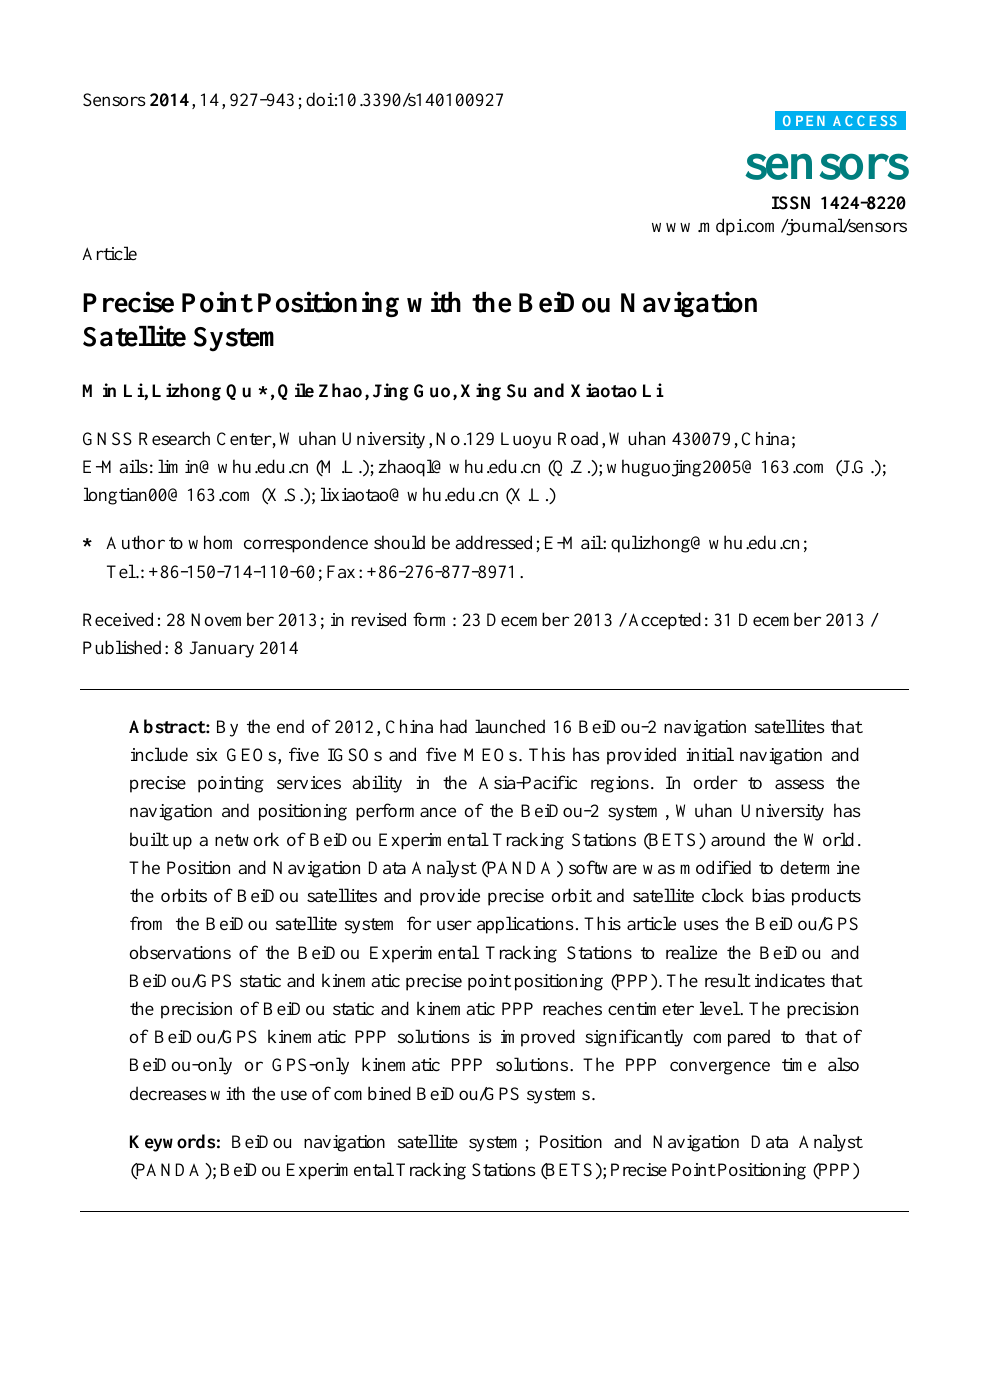 Precise Point Positioning With The Beidou Navigation Satellite System Topic Of Research Paper In Earth And Related Environmental Sciences Download Scholarly Article Pdf And Read For Free On Cyberleninka Open Science